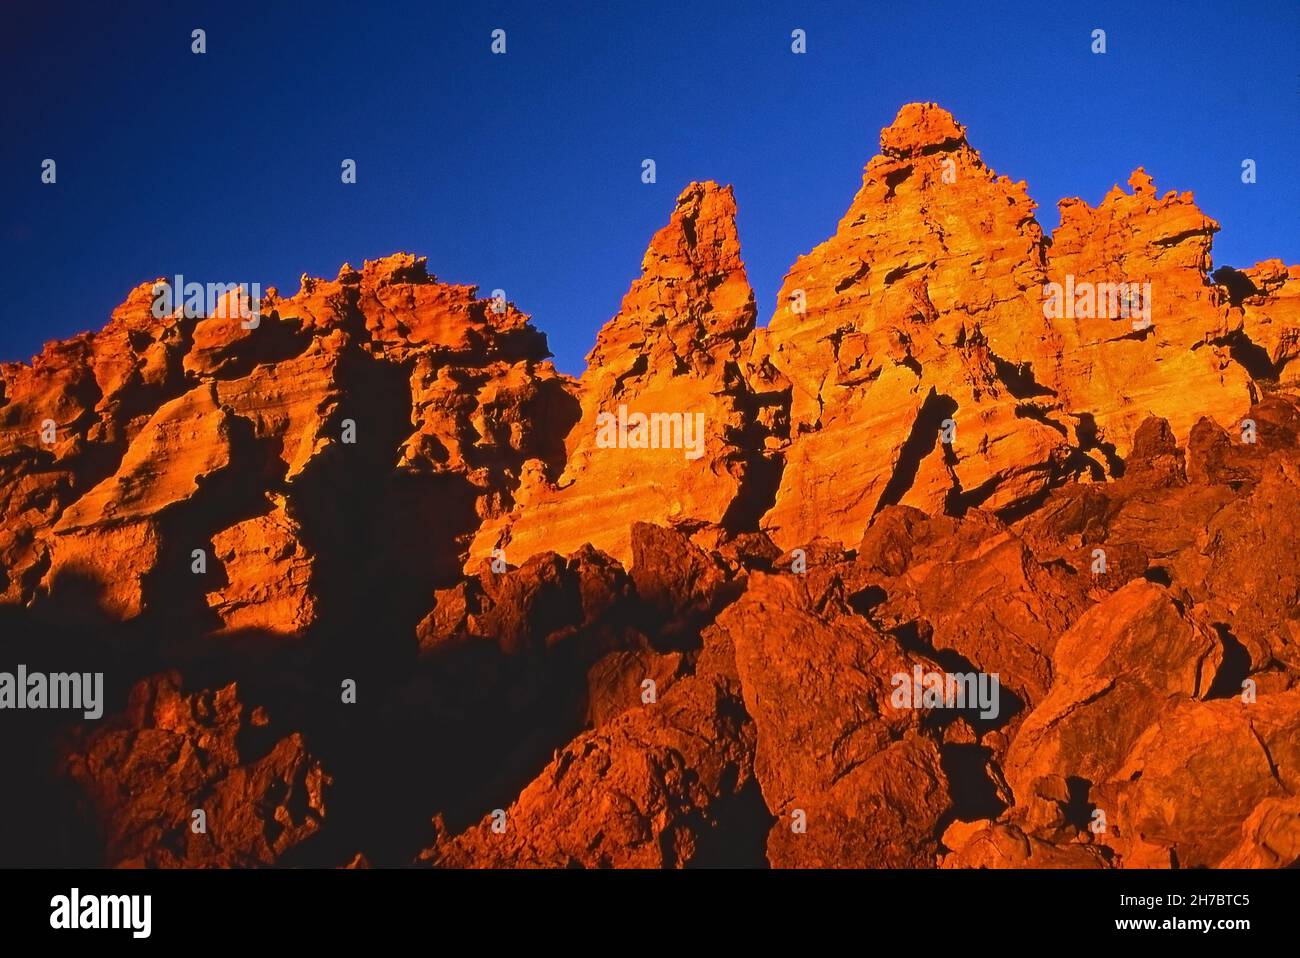 SPAIN, CANARY ISLANDS, TENERIFE, THE NATIONAL PARK OF EL TEIDE WITH THE ROCKS OF LOS CANADAS Stock Photo